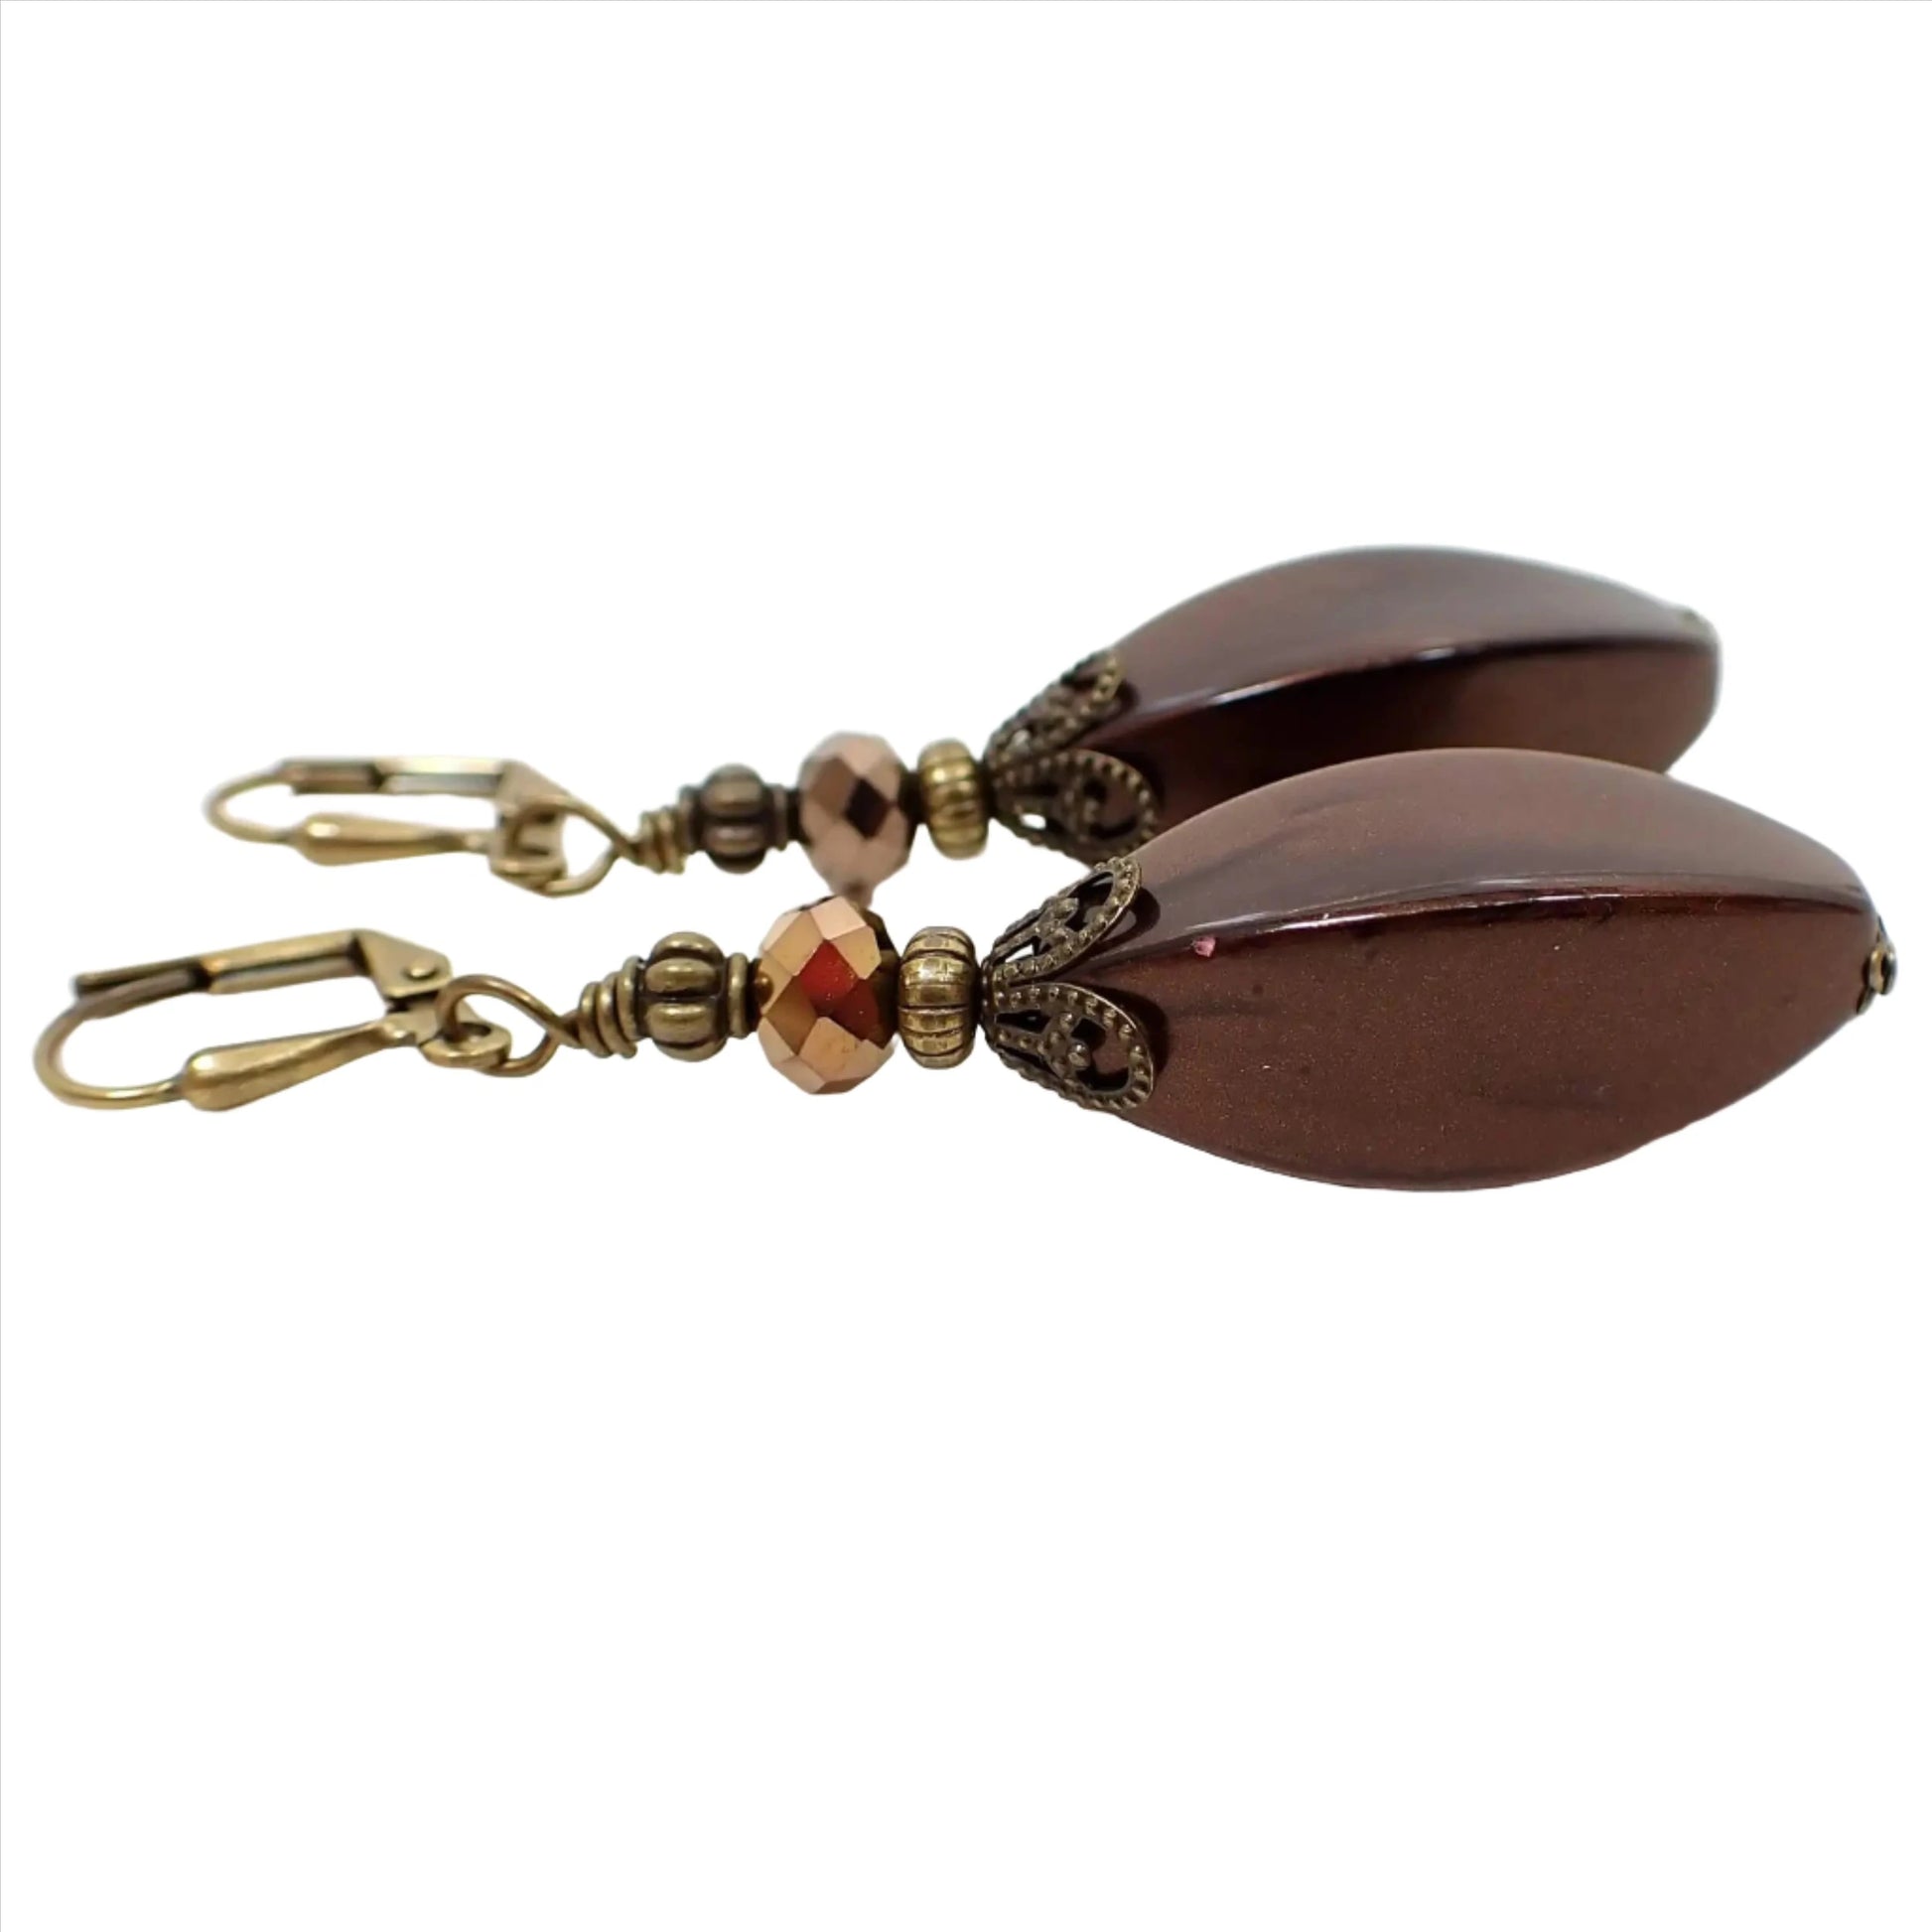 Side view of the handmade large brown drop earrings. The metal is antiqued brass in color. There are large vintage lucite beads at the bottom in pearly dark mocha brown color. The top glass crystal beads are faceted and metallic bronze in color.